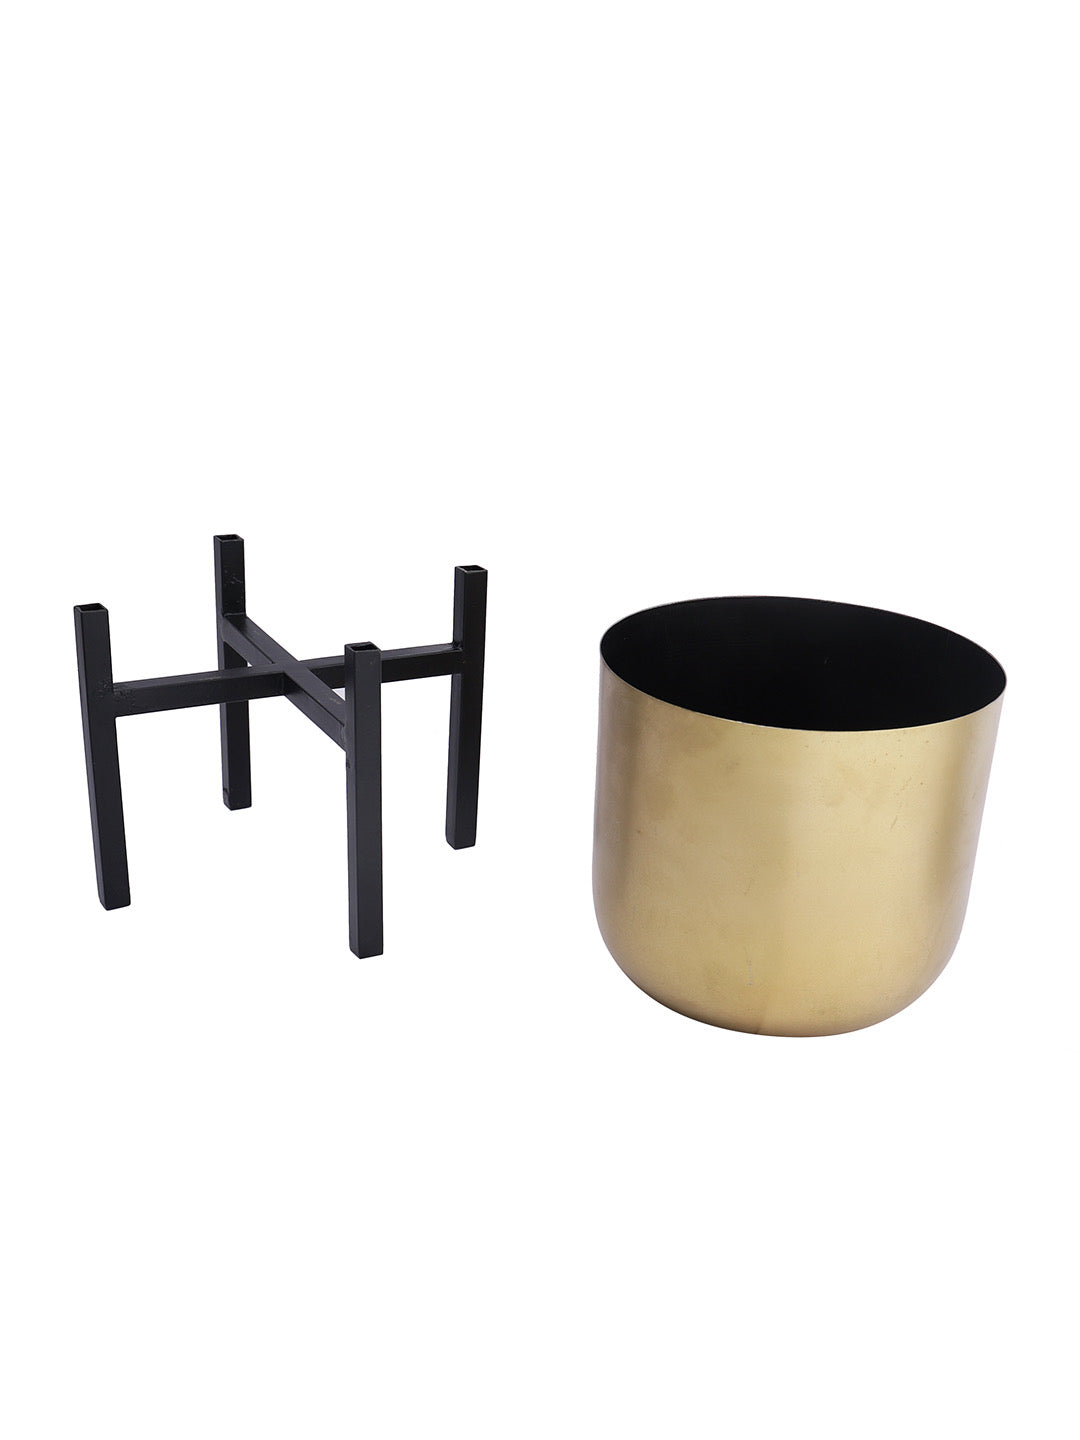 Golden Coated Planter with Stand - Default Title (CHM2122)